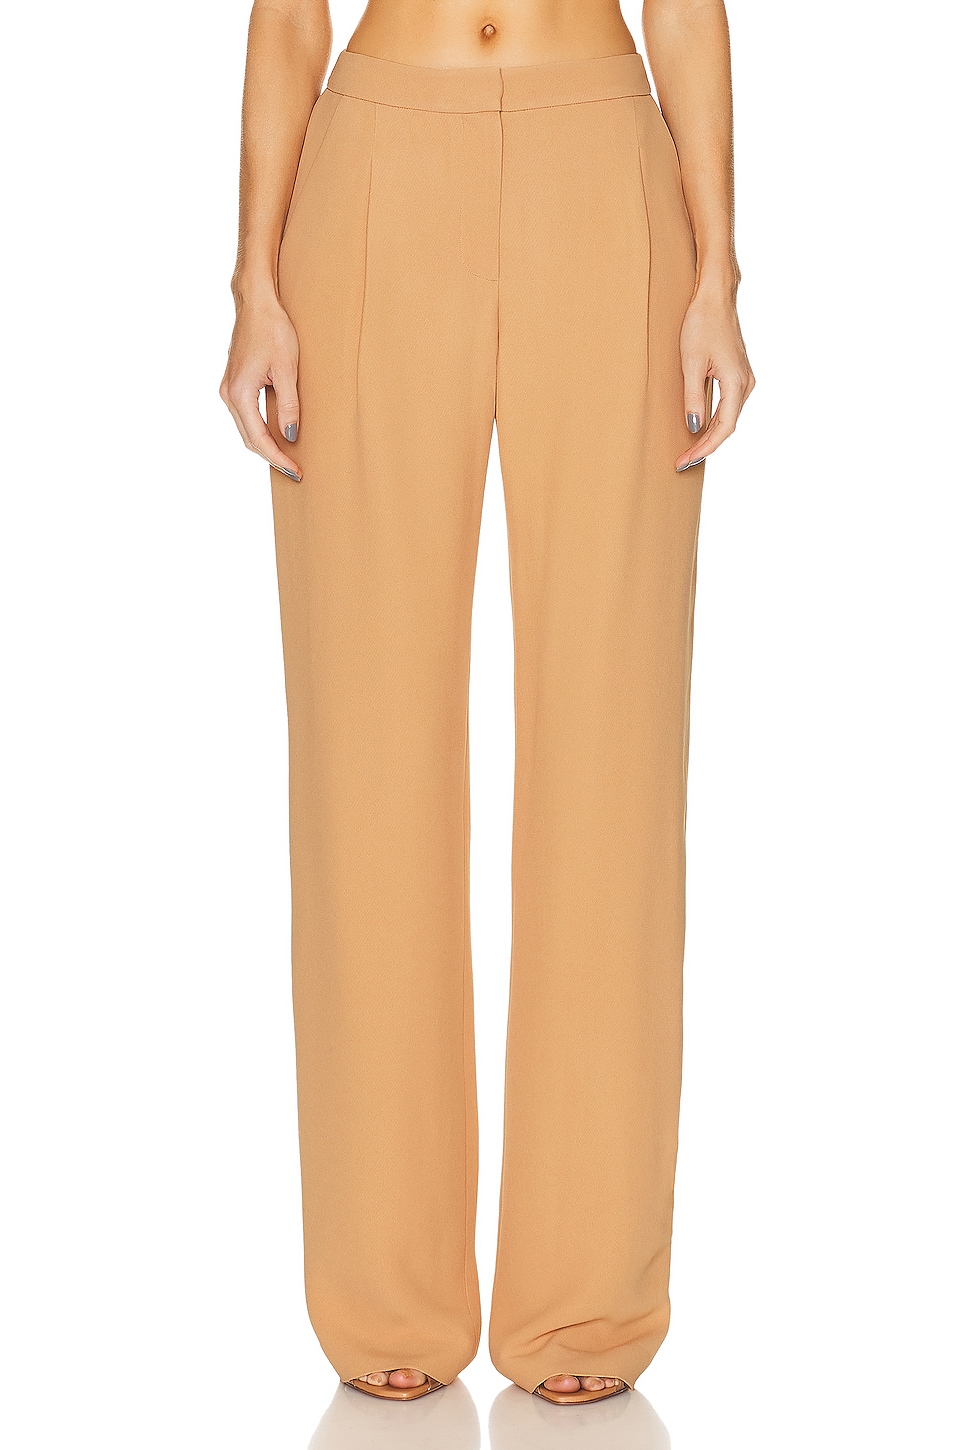 Image 1 of Alexis Leith Pant in Topaz